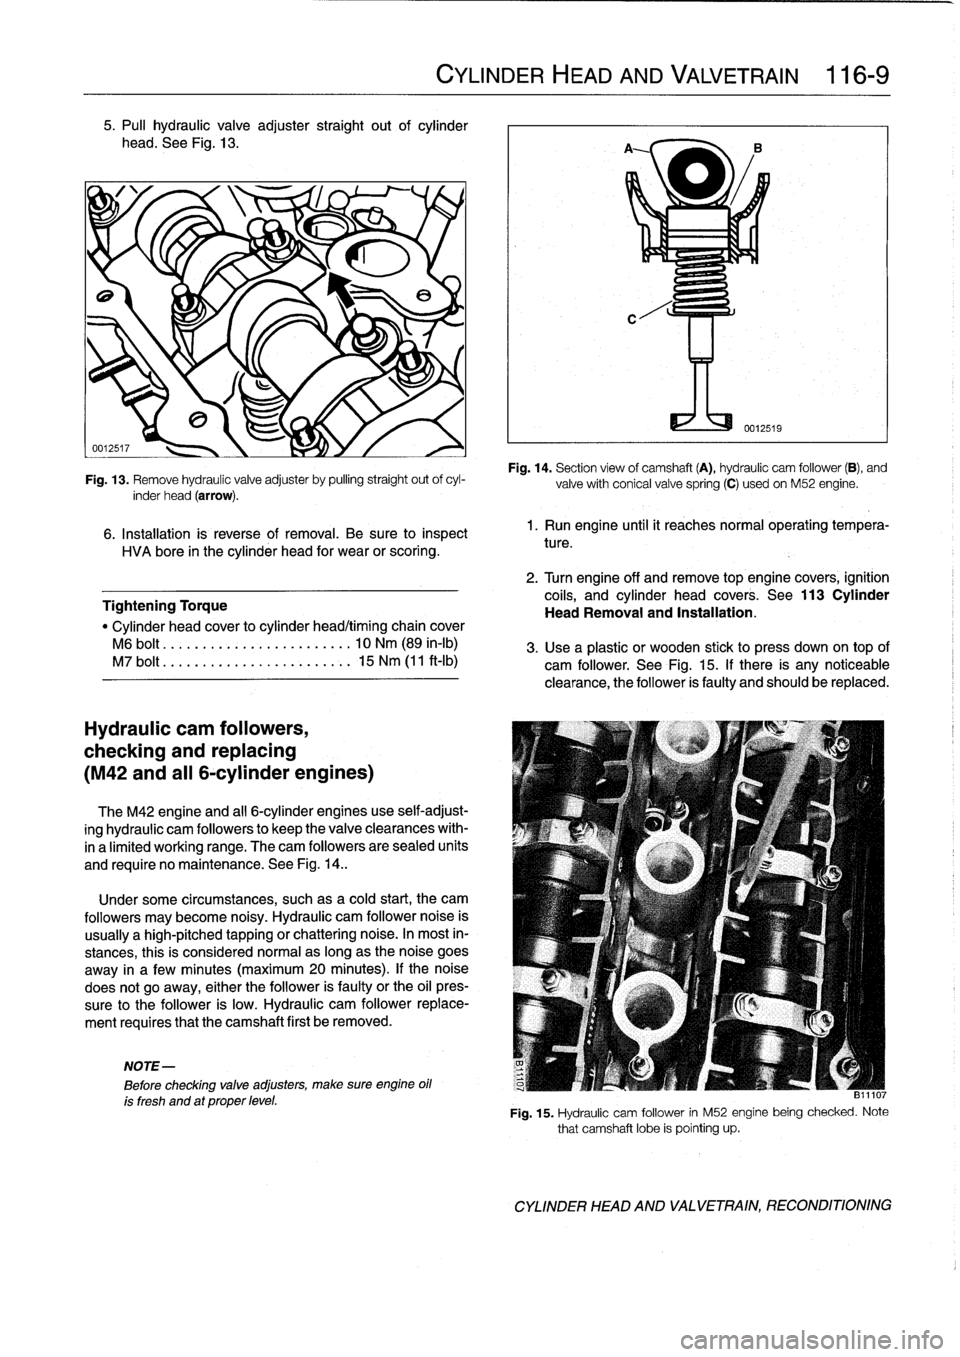 BMW 323i 1995 E36 User Guide 5
.
Pull
hydraulic
valve
adjuster
straight
out
of
cylinder

head
.
See
Fig
.
13
.

Fig
.
13
.
Remove
hydraulic
valve
adjuster
by
pulling
straight
out
ofcyl-
inder
head
(arrow)
.

6
.
Installation
is
r